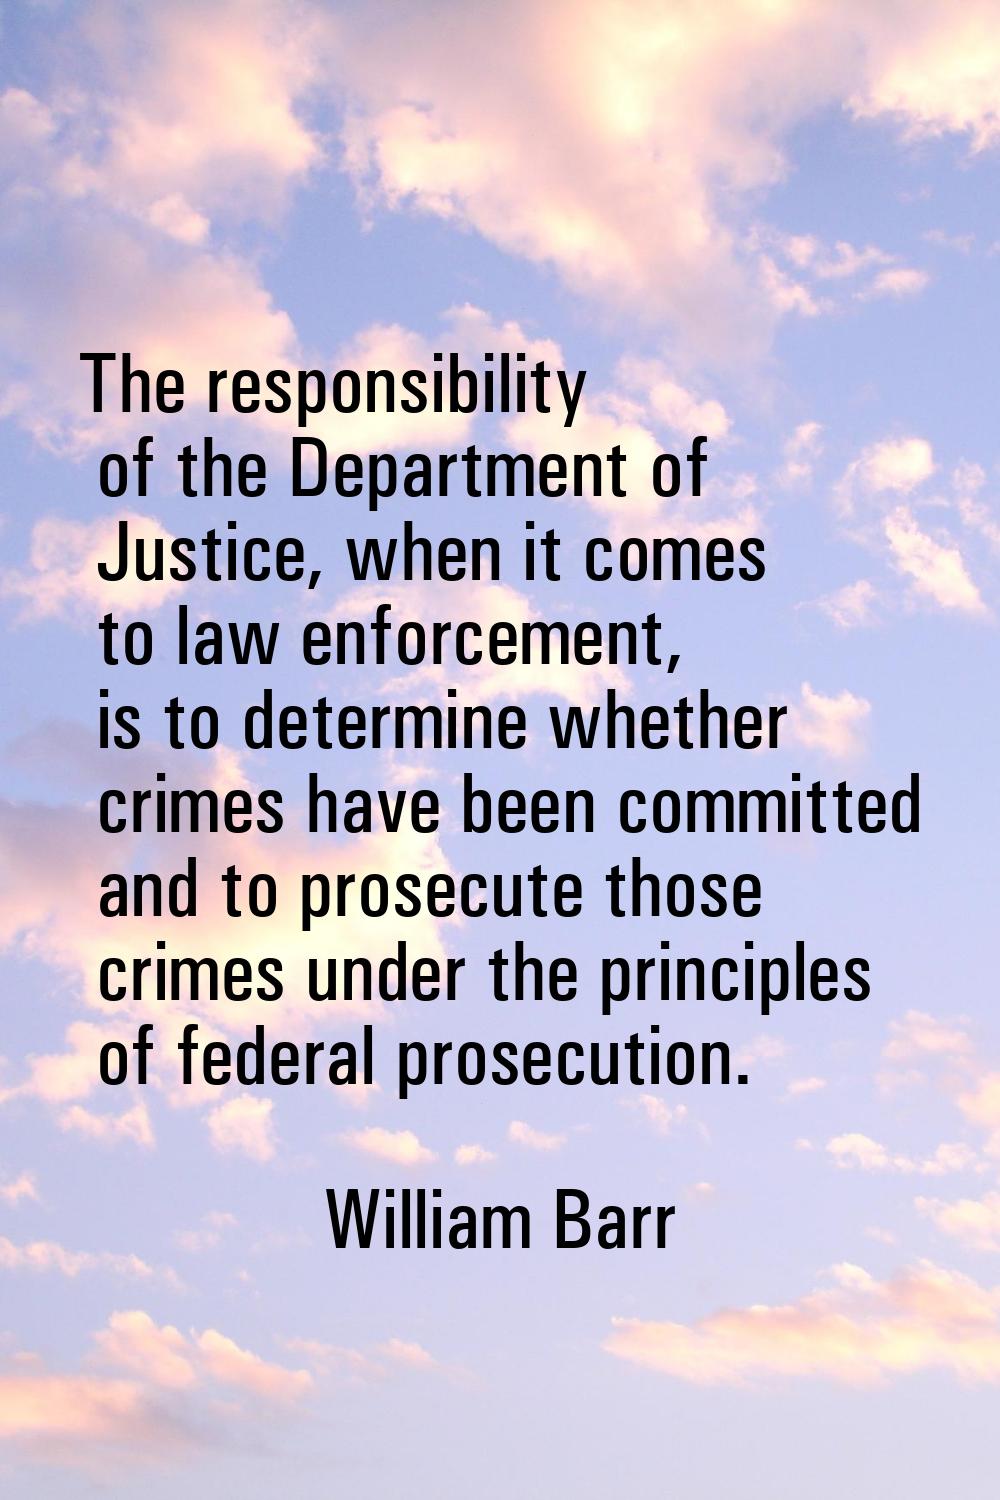 The responsibility of the Department of Justice, when it comes to law enforcement, is to determine 